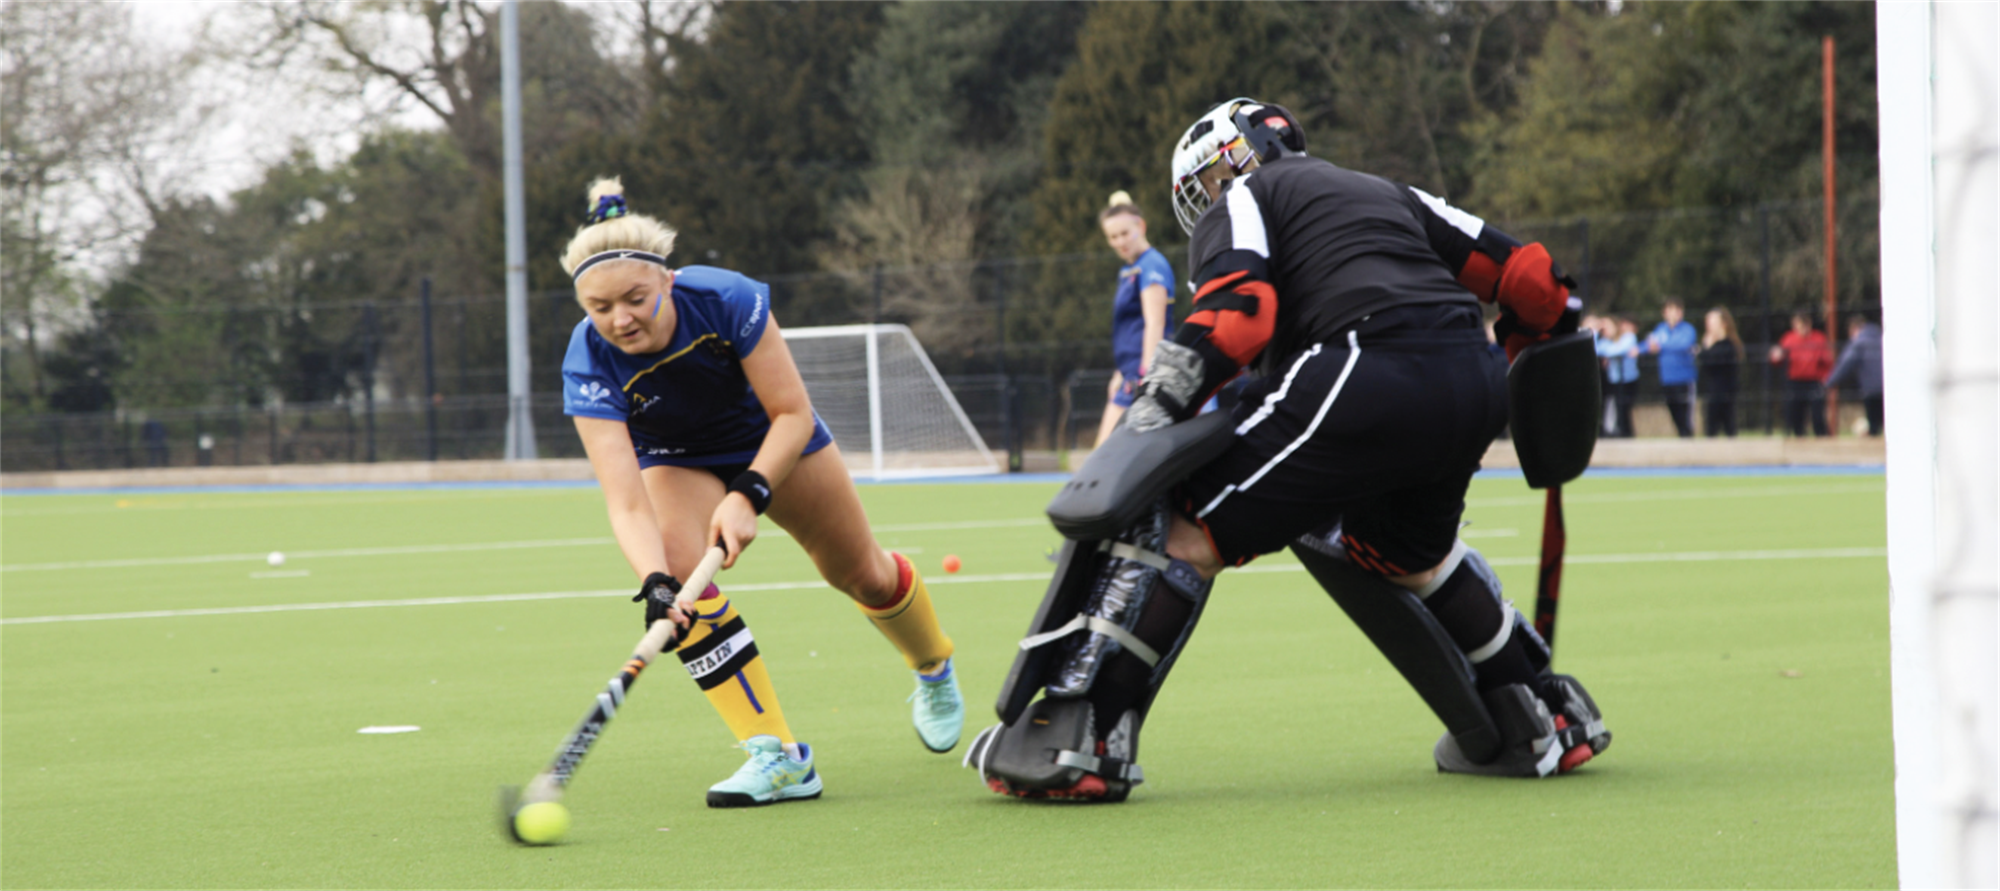 The University of Chichester is one of over 150 Universities currently affiliated to British Universities and Colleges Sports (BUCS) competition.